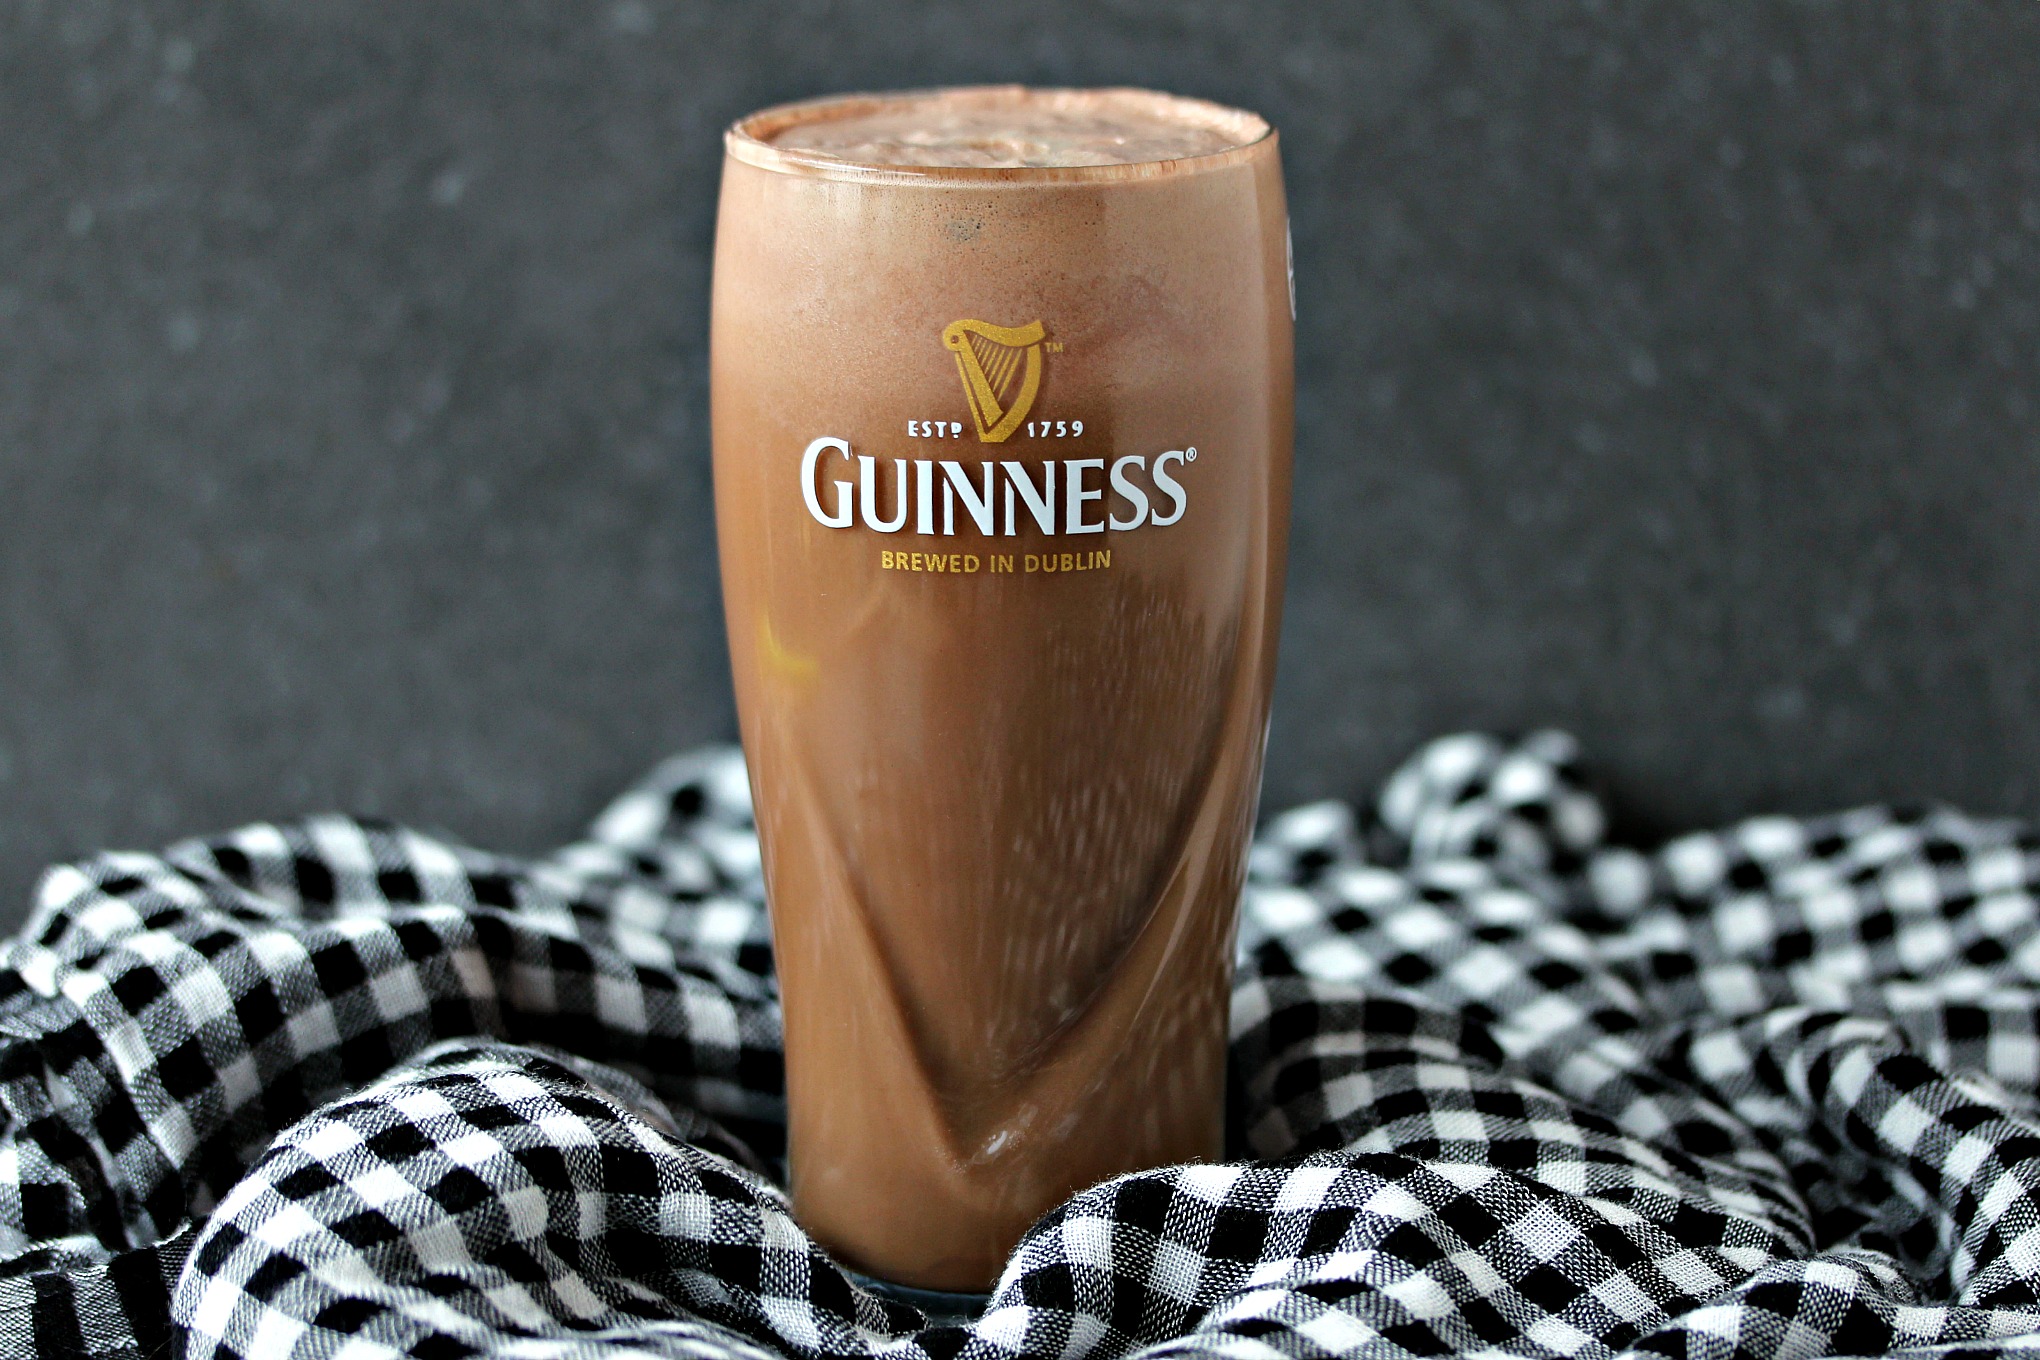 Chocolate Guinness Float served in a tall glass on a houndstooth fabric napkin